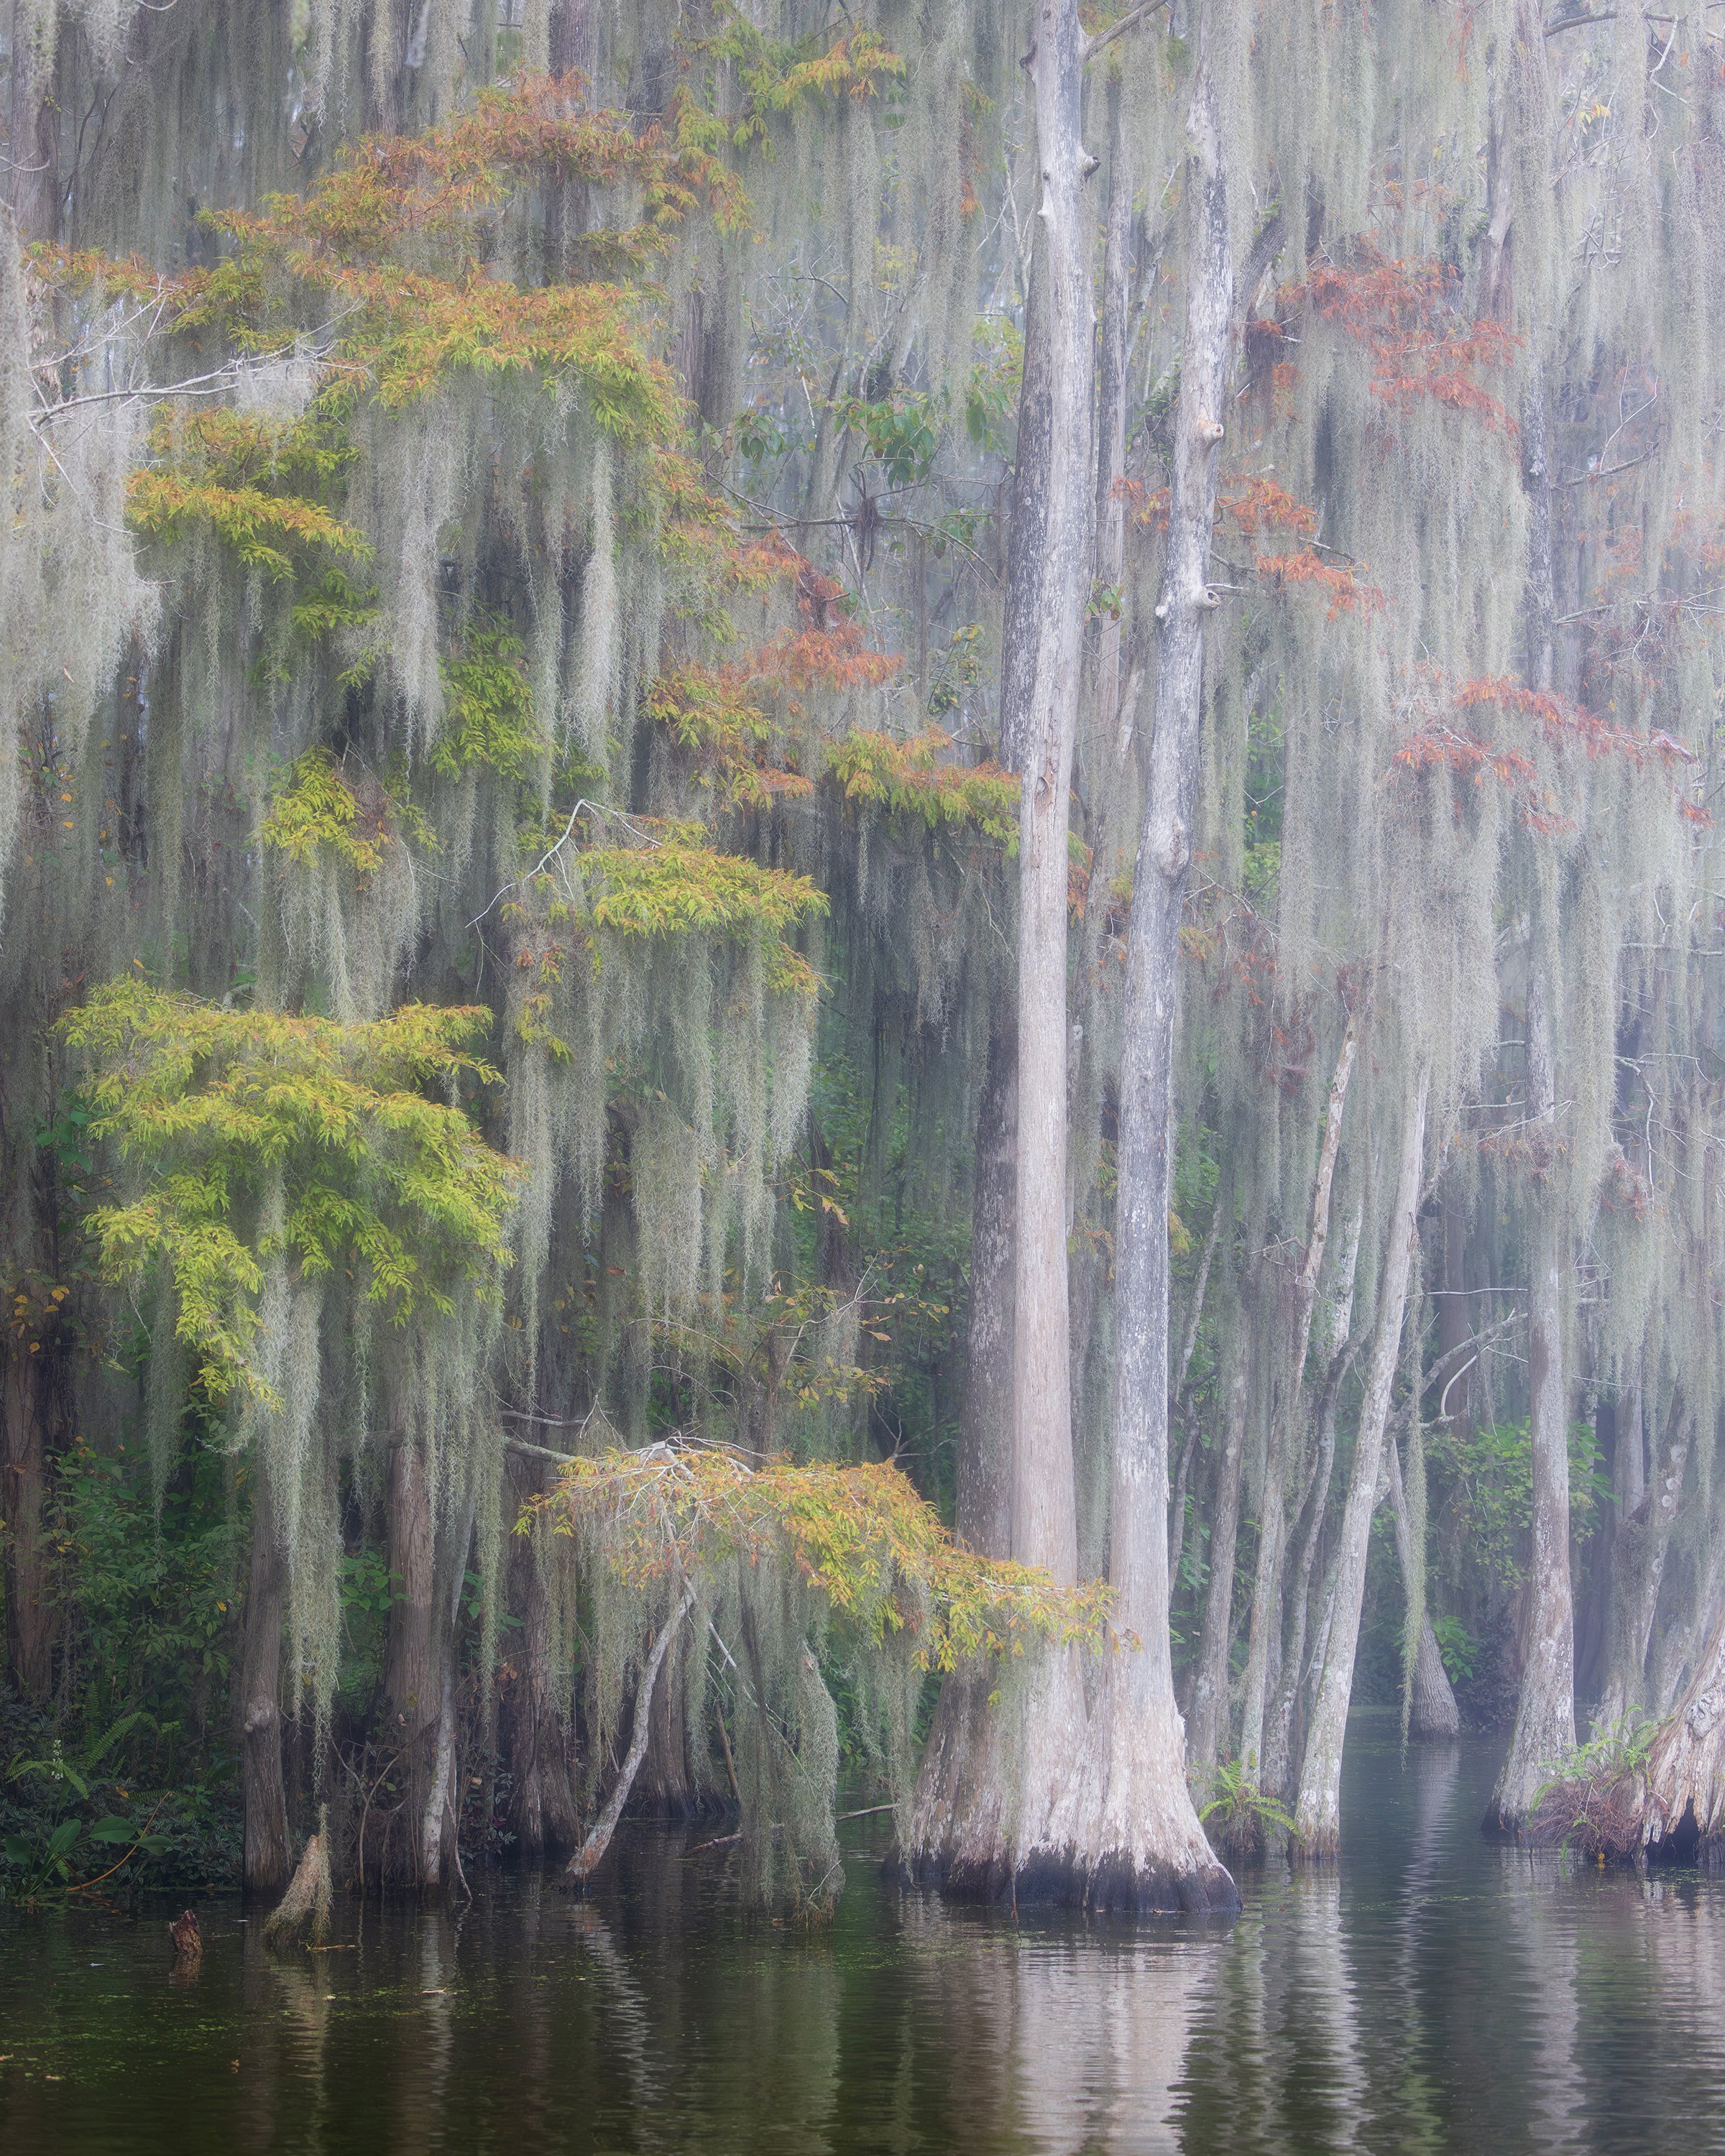  Cypress and moss along the canal 